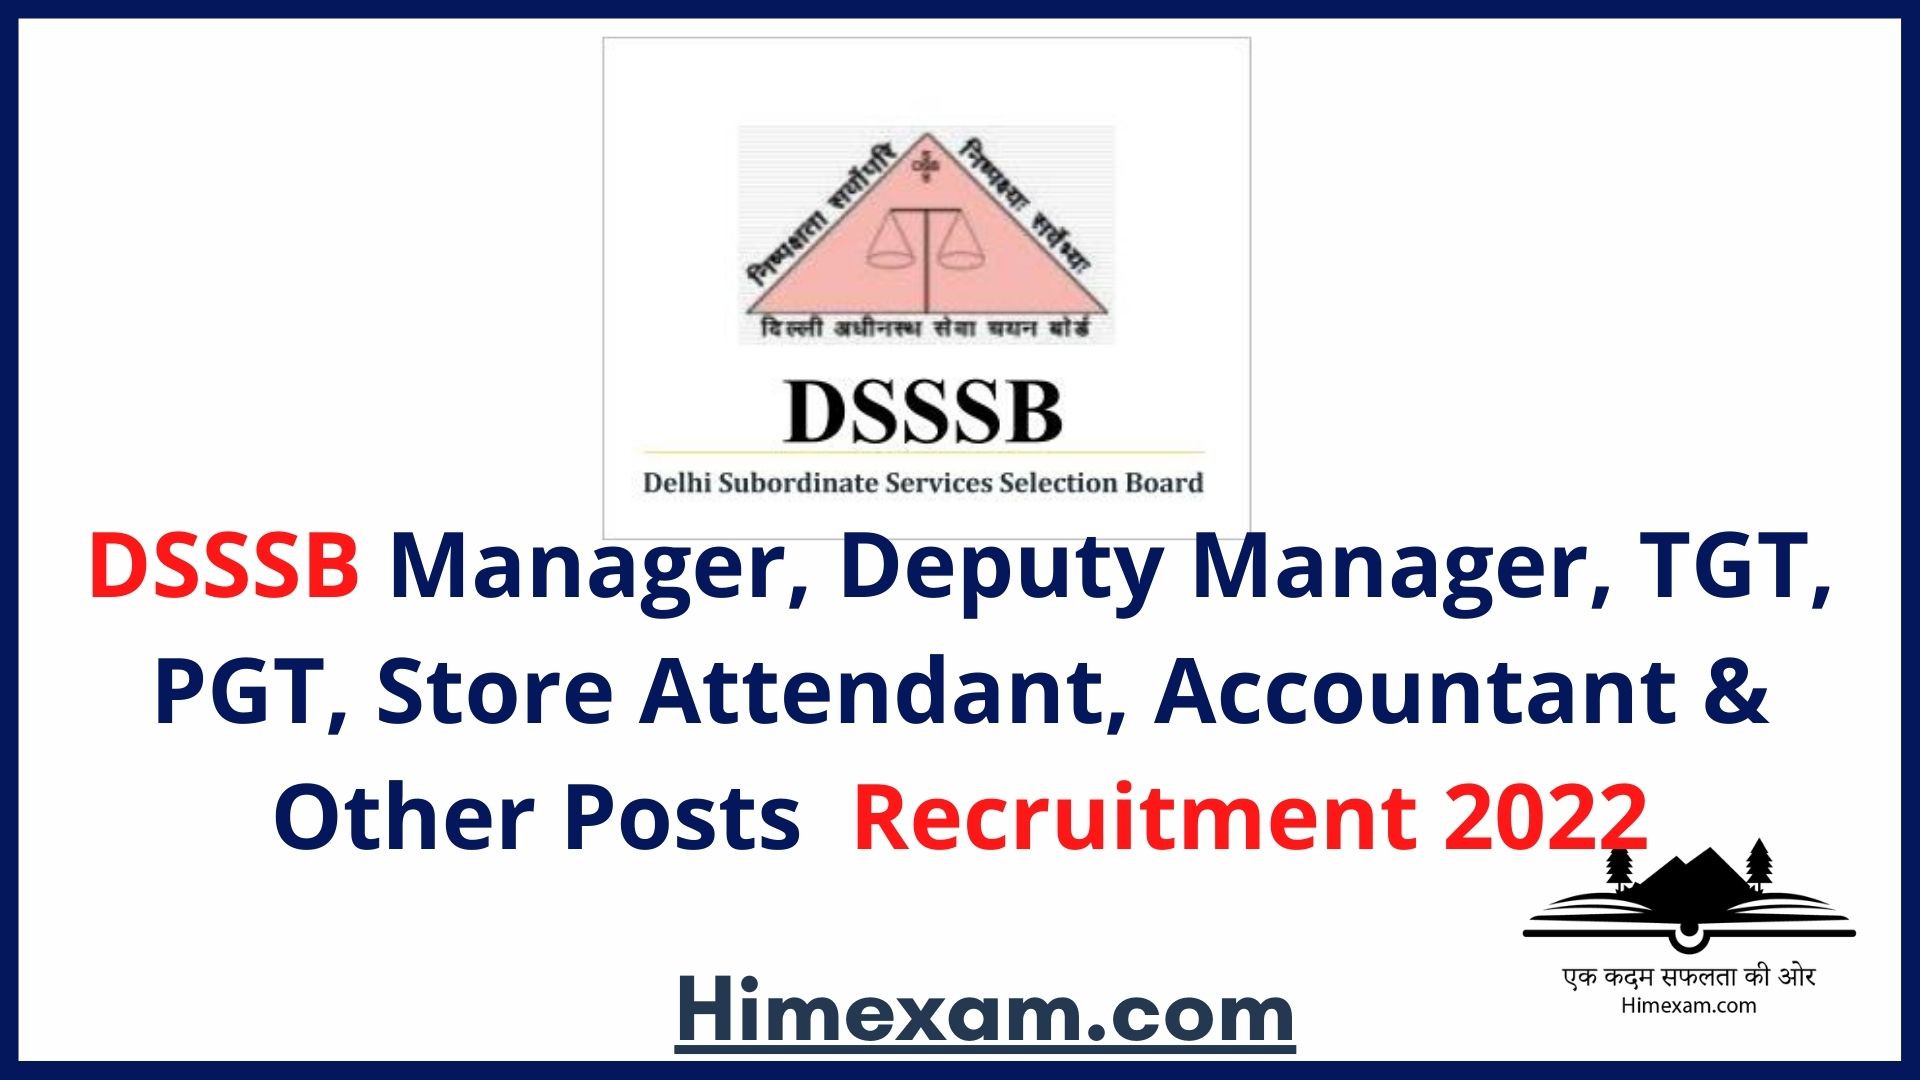 DSSSB Manager, Deputy Manager, TGT, PGT, Store Attendant, Accountant & Other Posts  Recruitment 2022